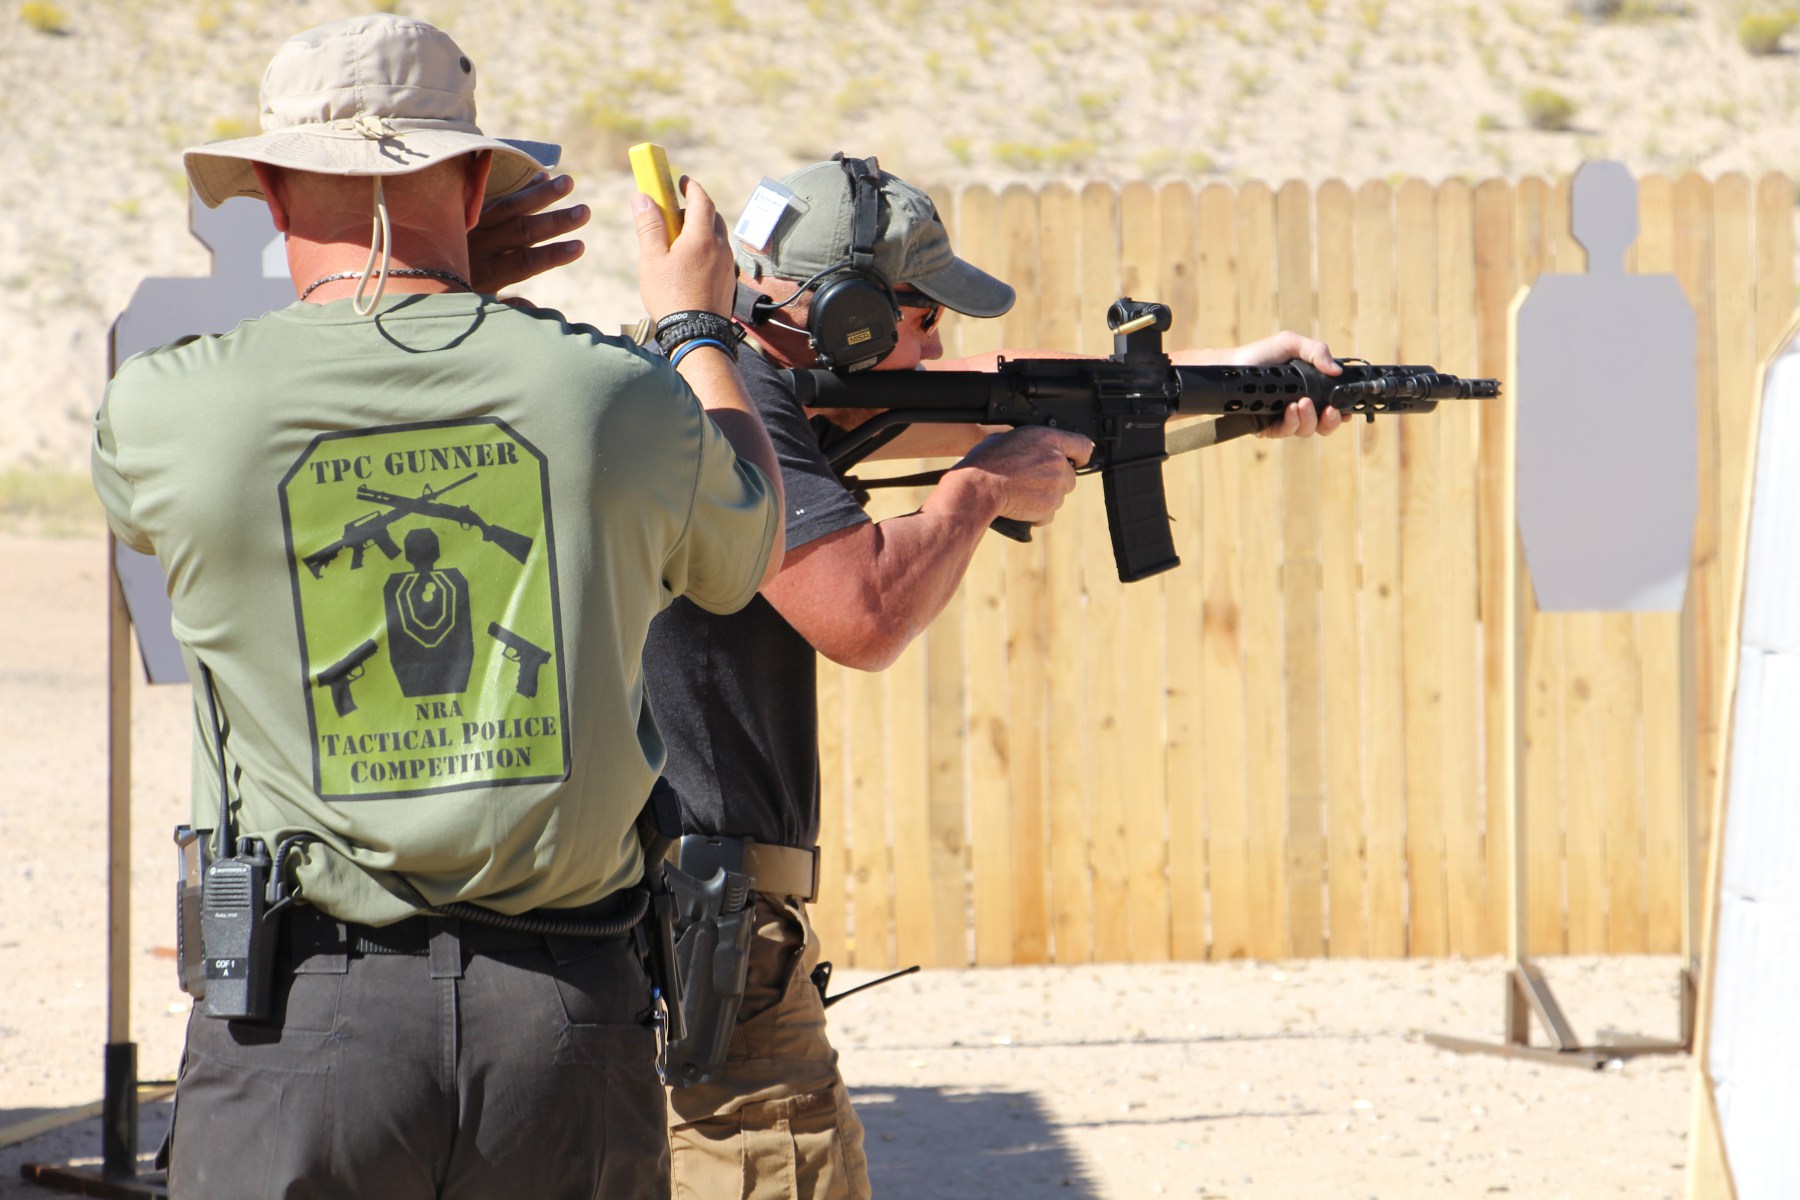 Ammoland: Kahr Firearms Group Sponsors NRA Tactical Police Competition July 20-21